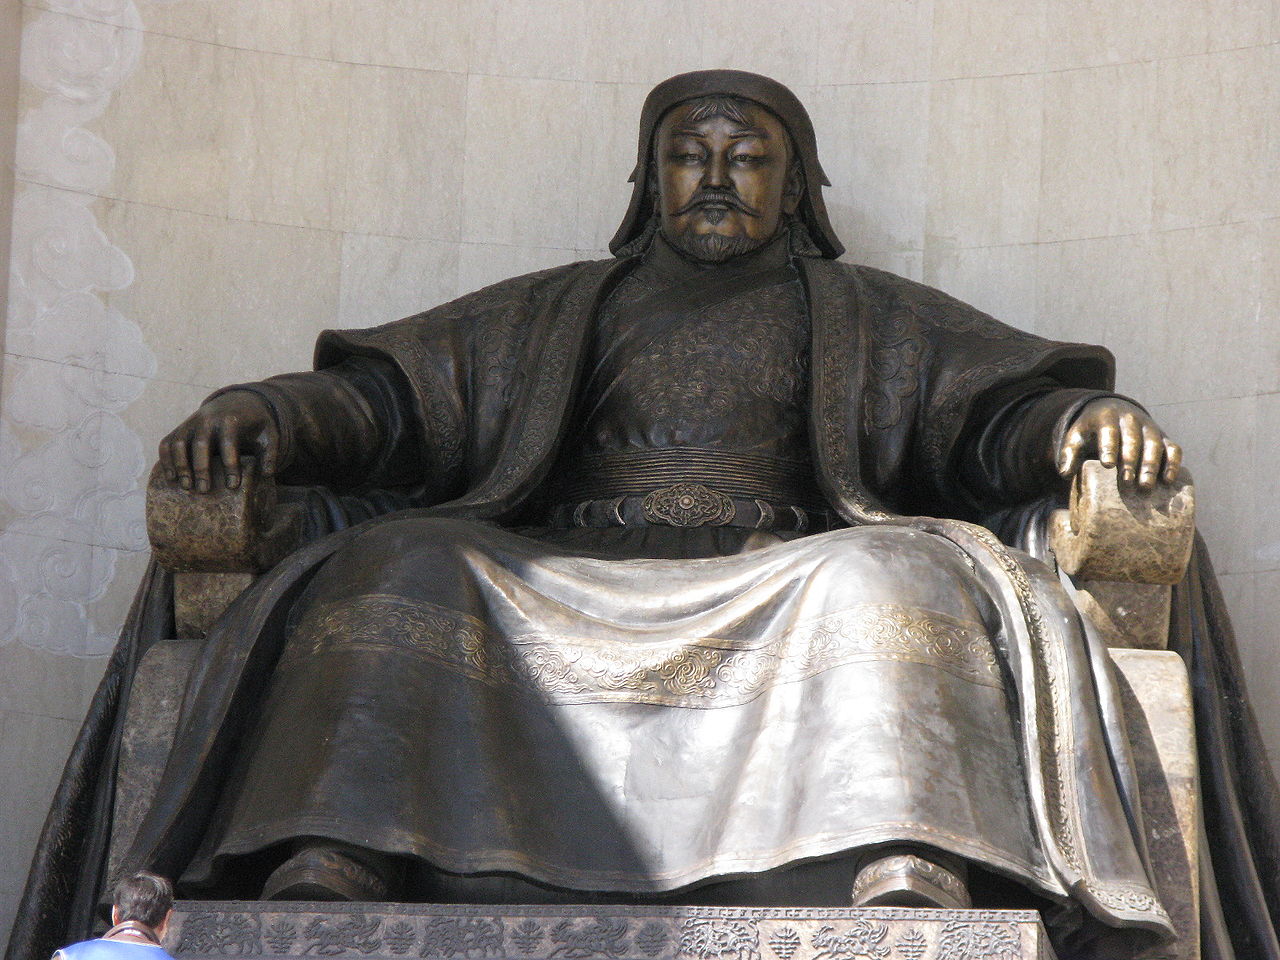 From Genghis Khan to Kublai Khan